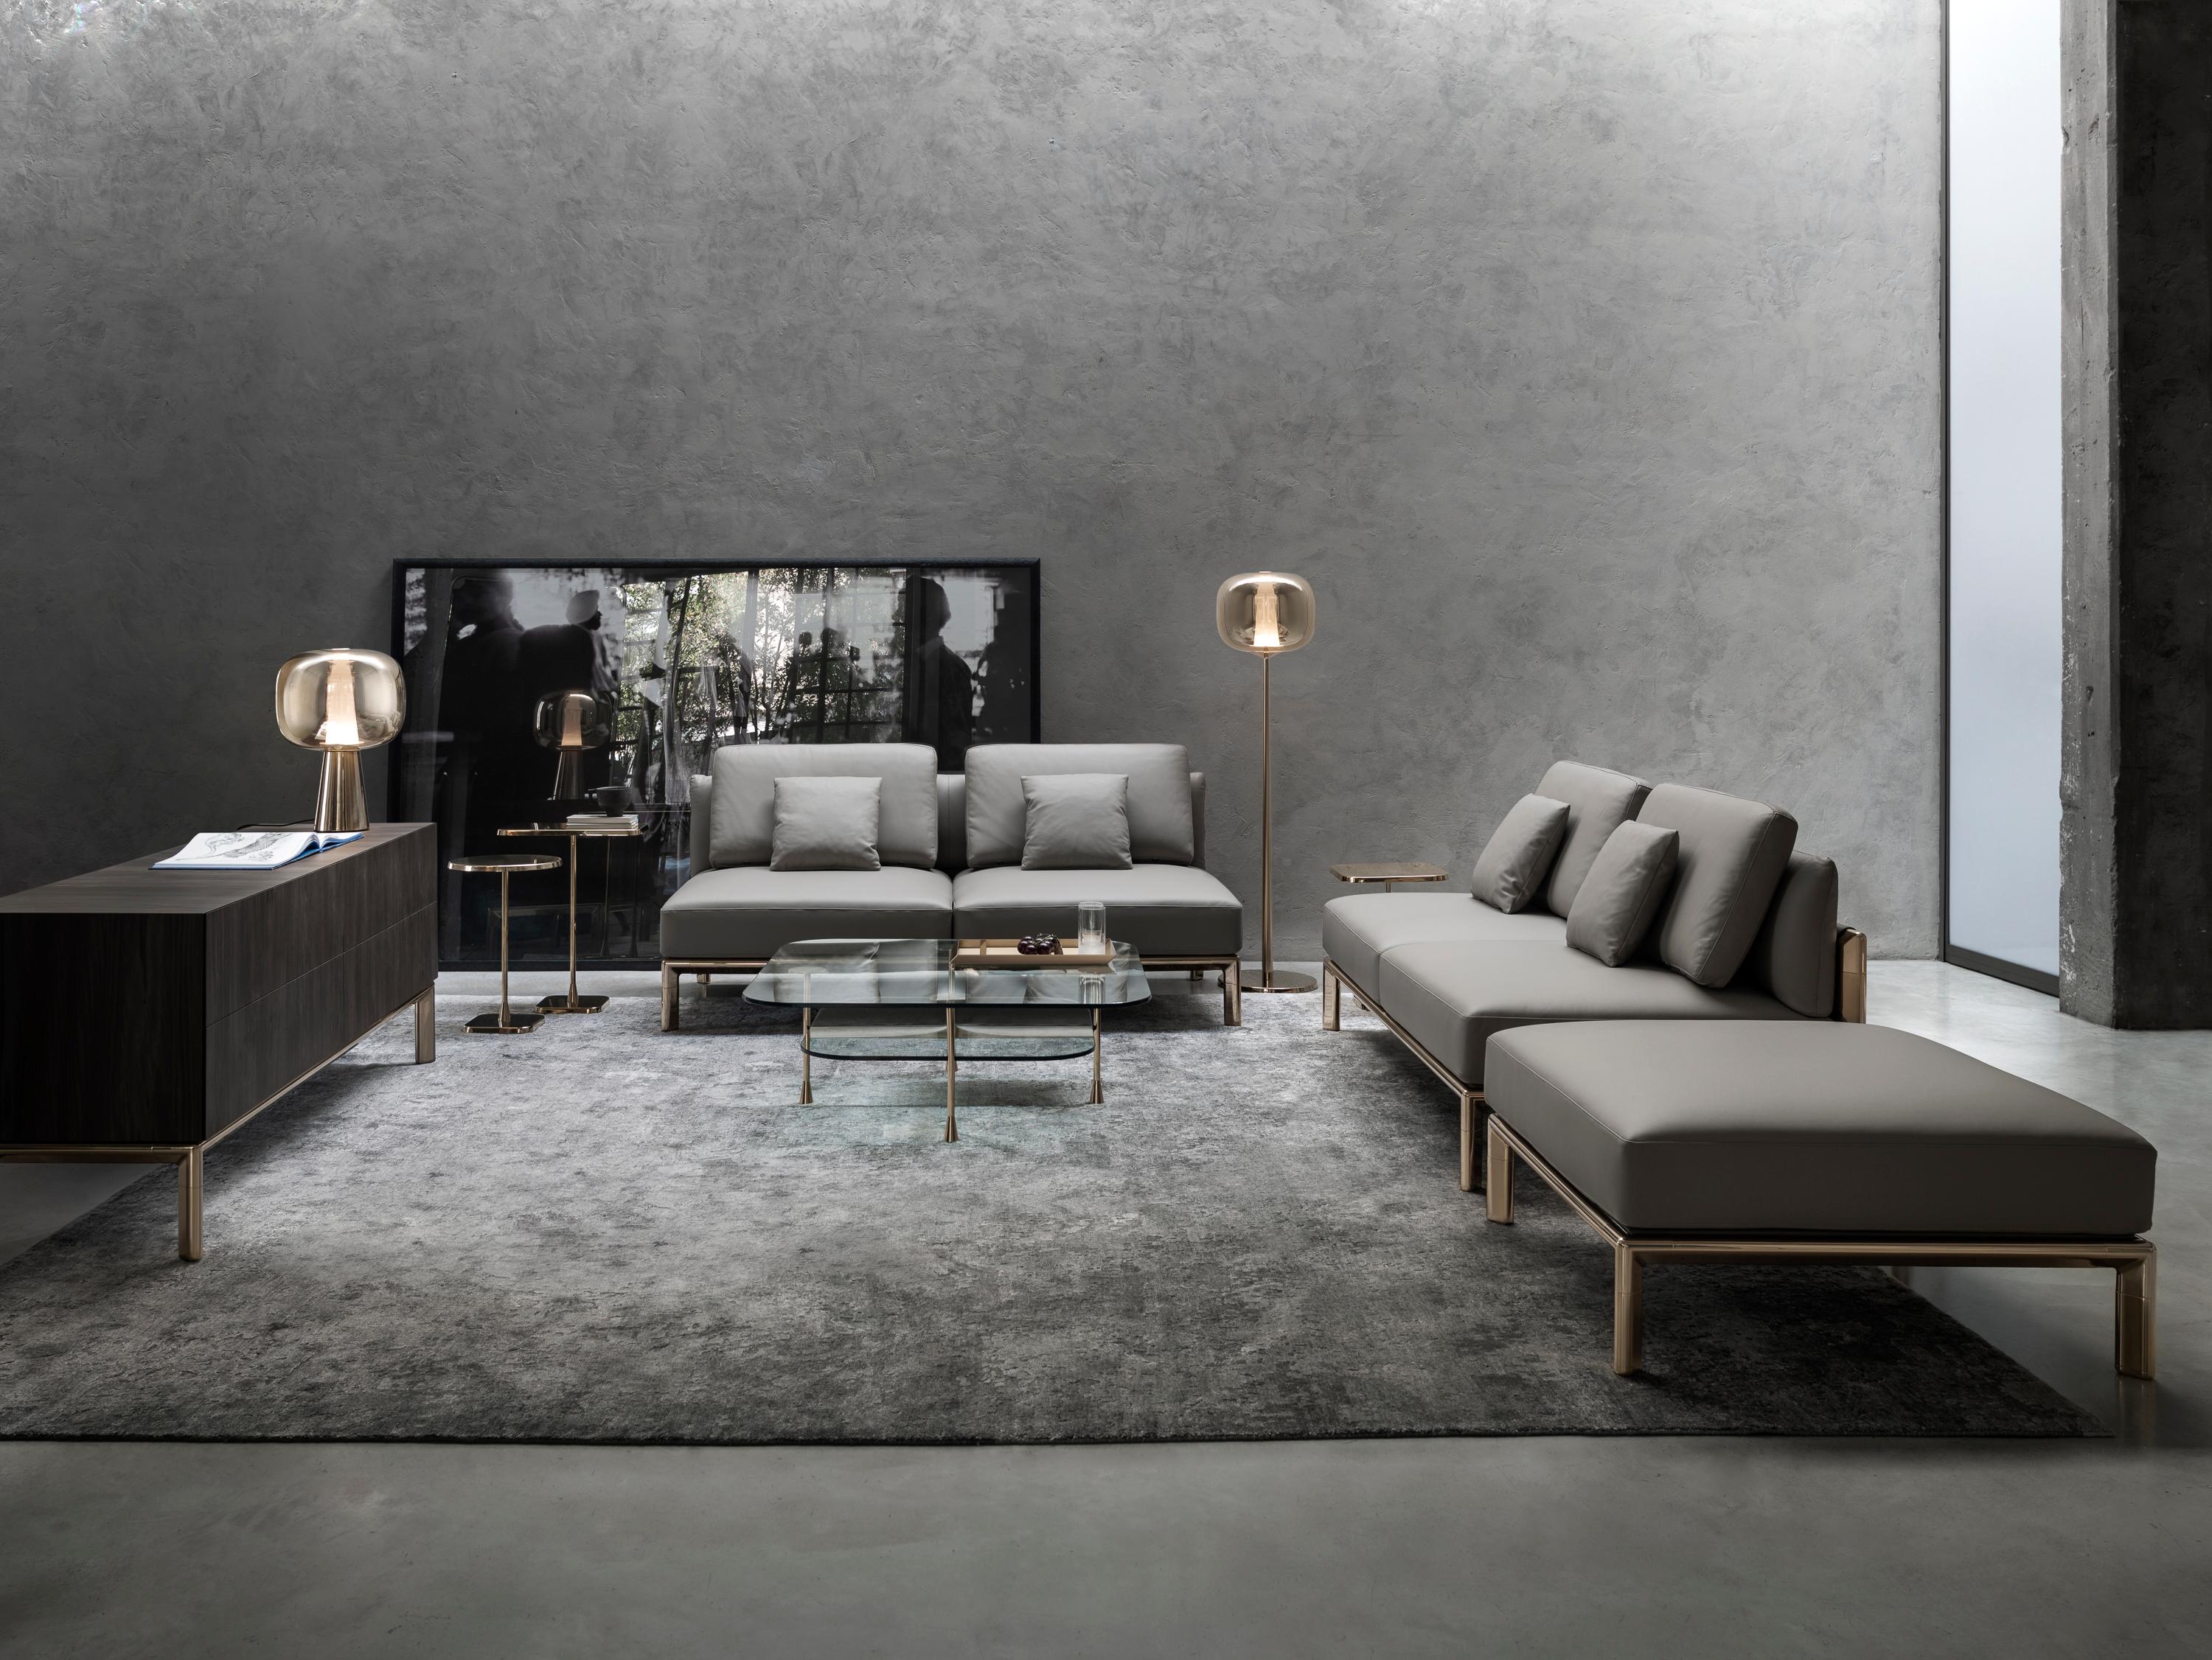 Stefano Giovannoni designs frame for Ghidini 1961, a new collection composed of sofas, armchairs, dining and coffee tables, bookshelves and cabinets. Everything starts from a simple element: 